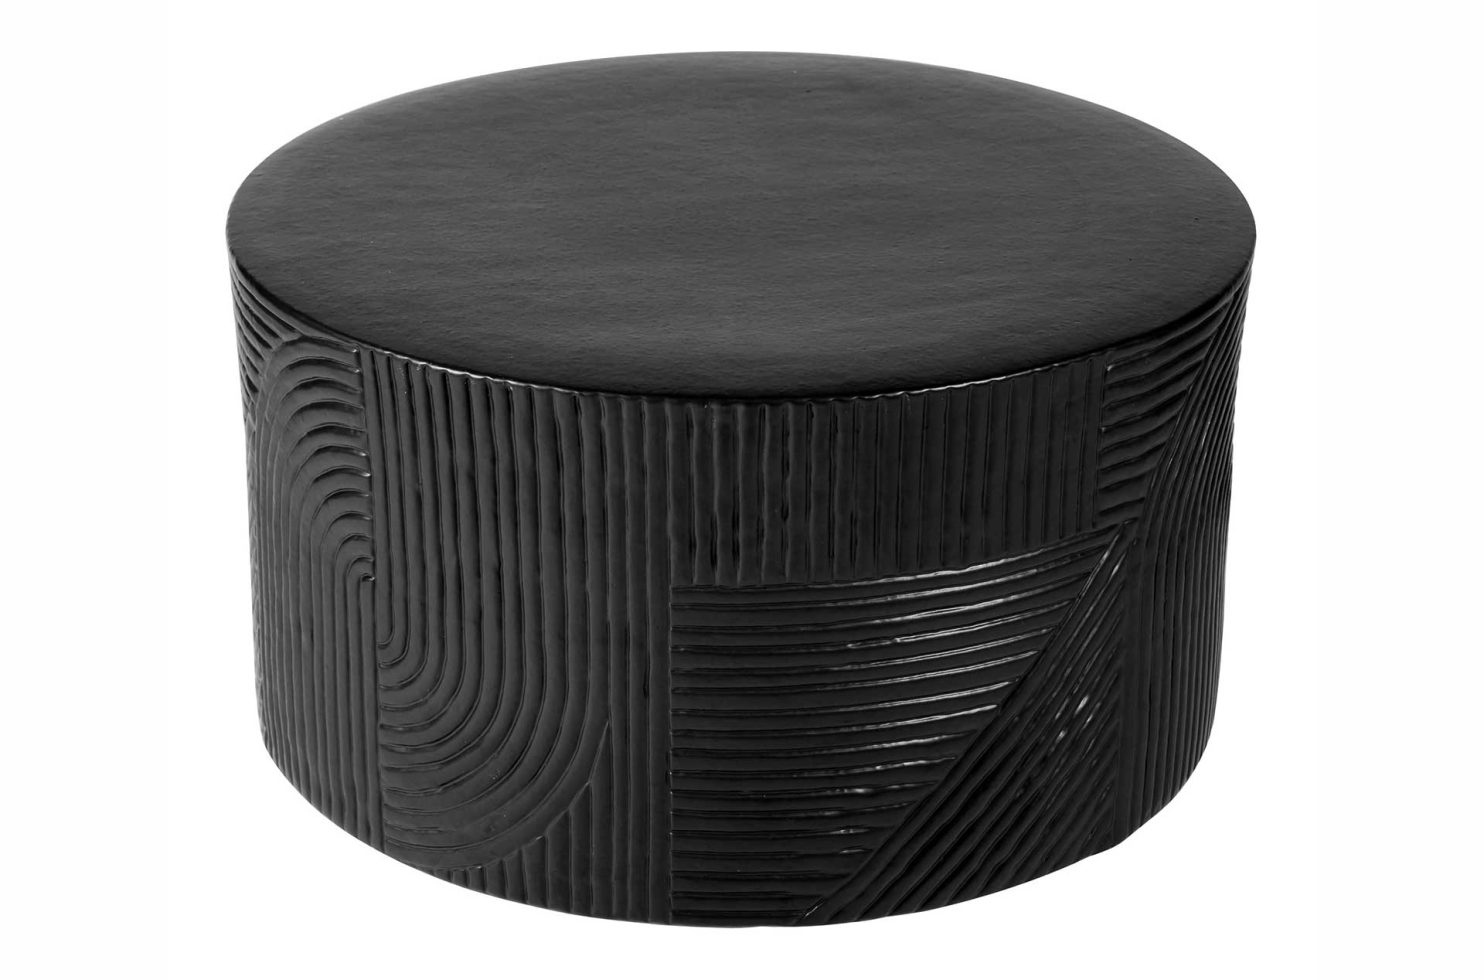 prov cer serenity textured round table 24in C30891432 coal 5 above web